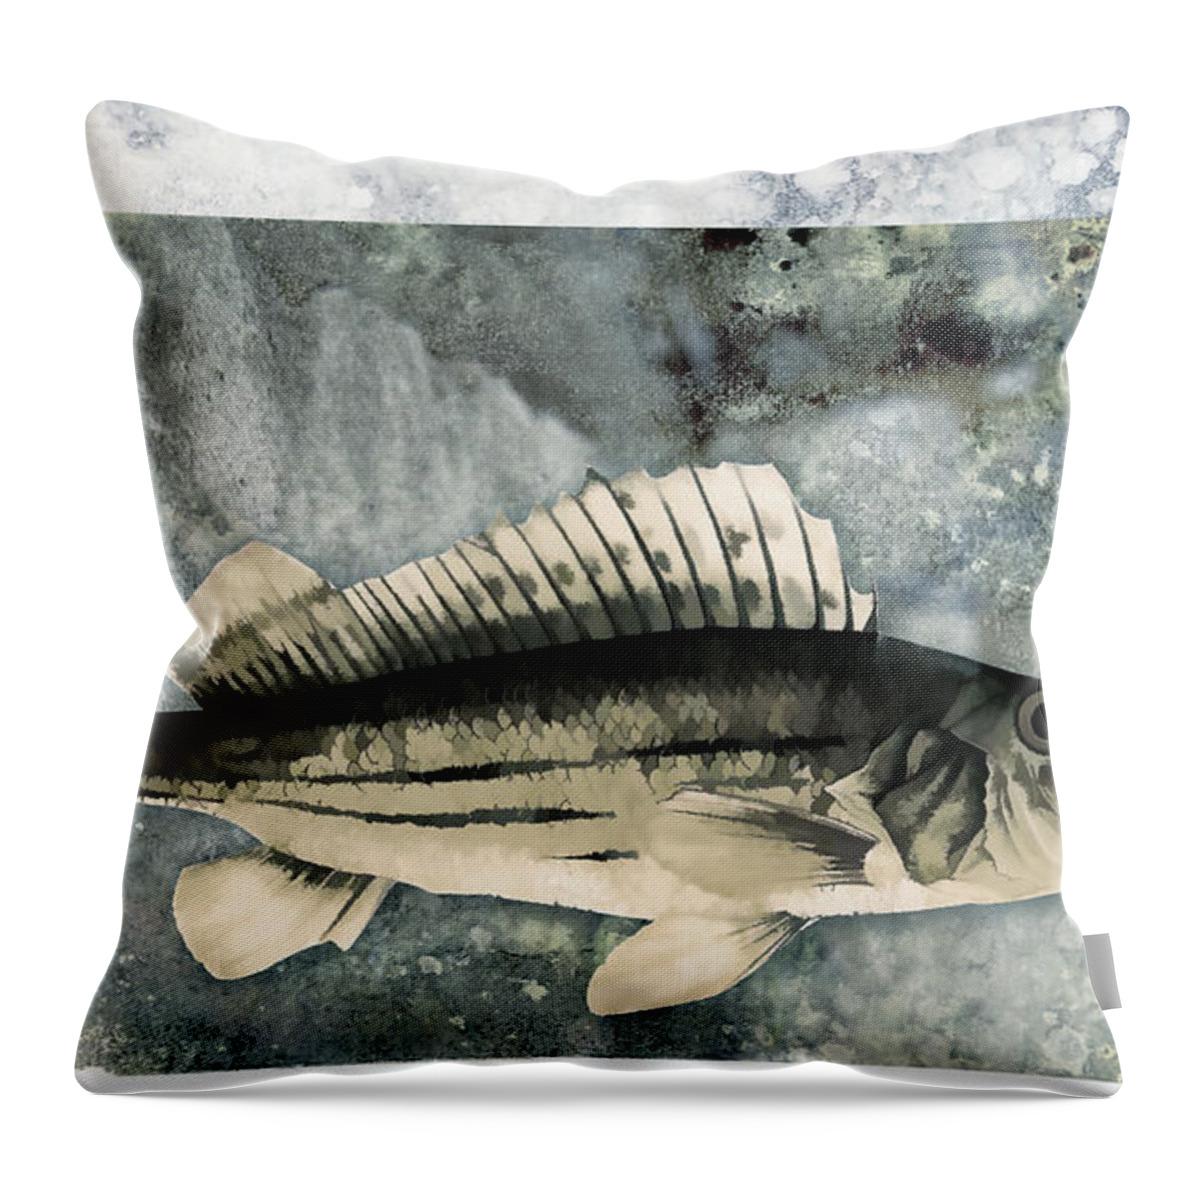 Fish Throw Pillow featuring the photograph Seaworthy by Carol Leigh